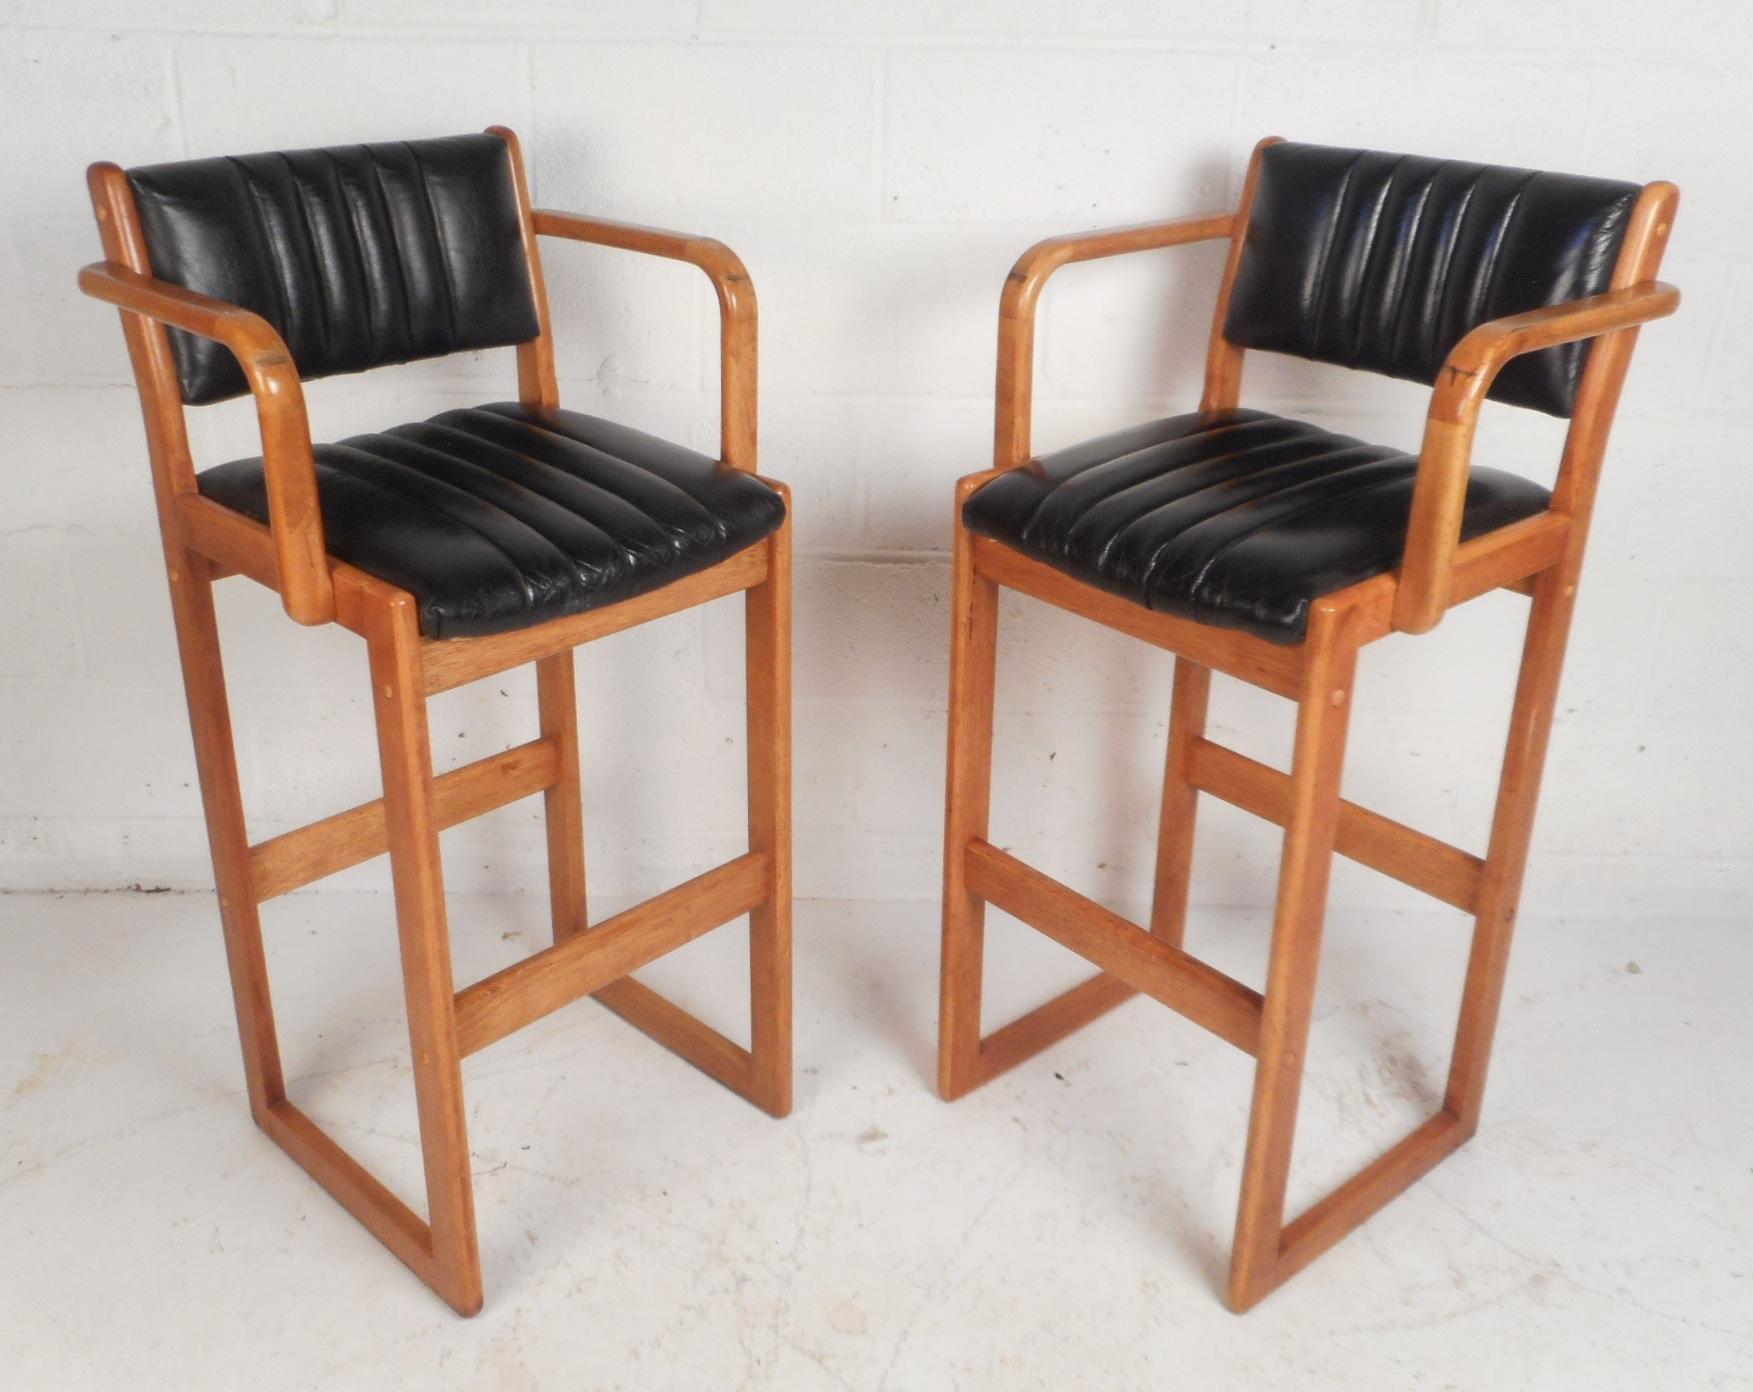 This beautiful pair of Danish modern bar stools feature a teak frame with sled legs. Unique design with high rounded arm rests, an angled backrest, and a black vinyl covered seat. This stunning pair offers plenty of comfort without sacrificing style